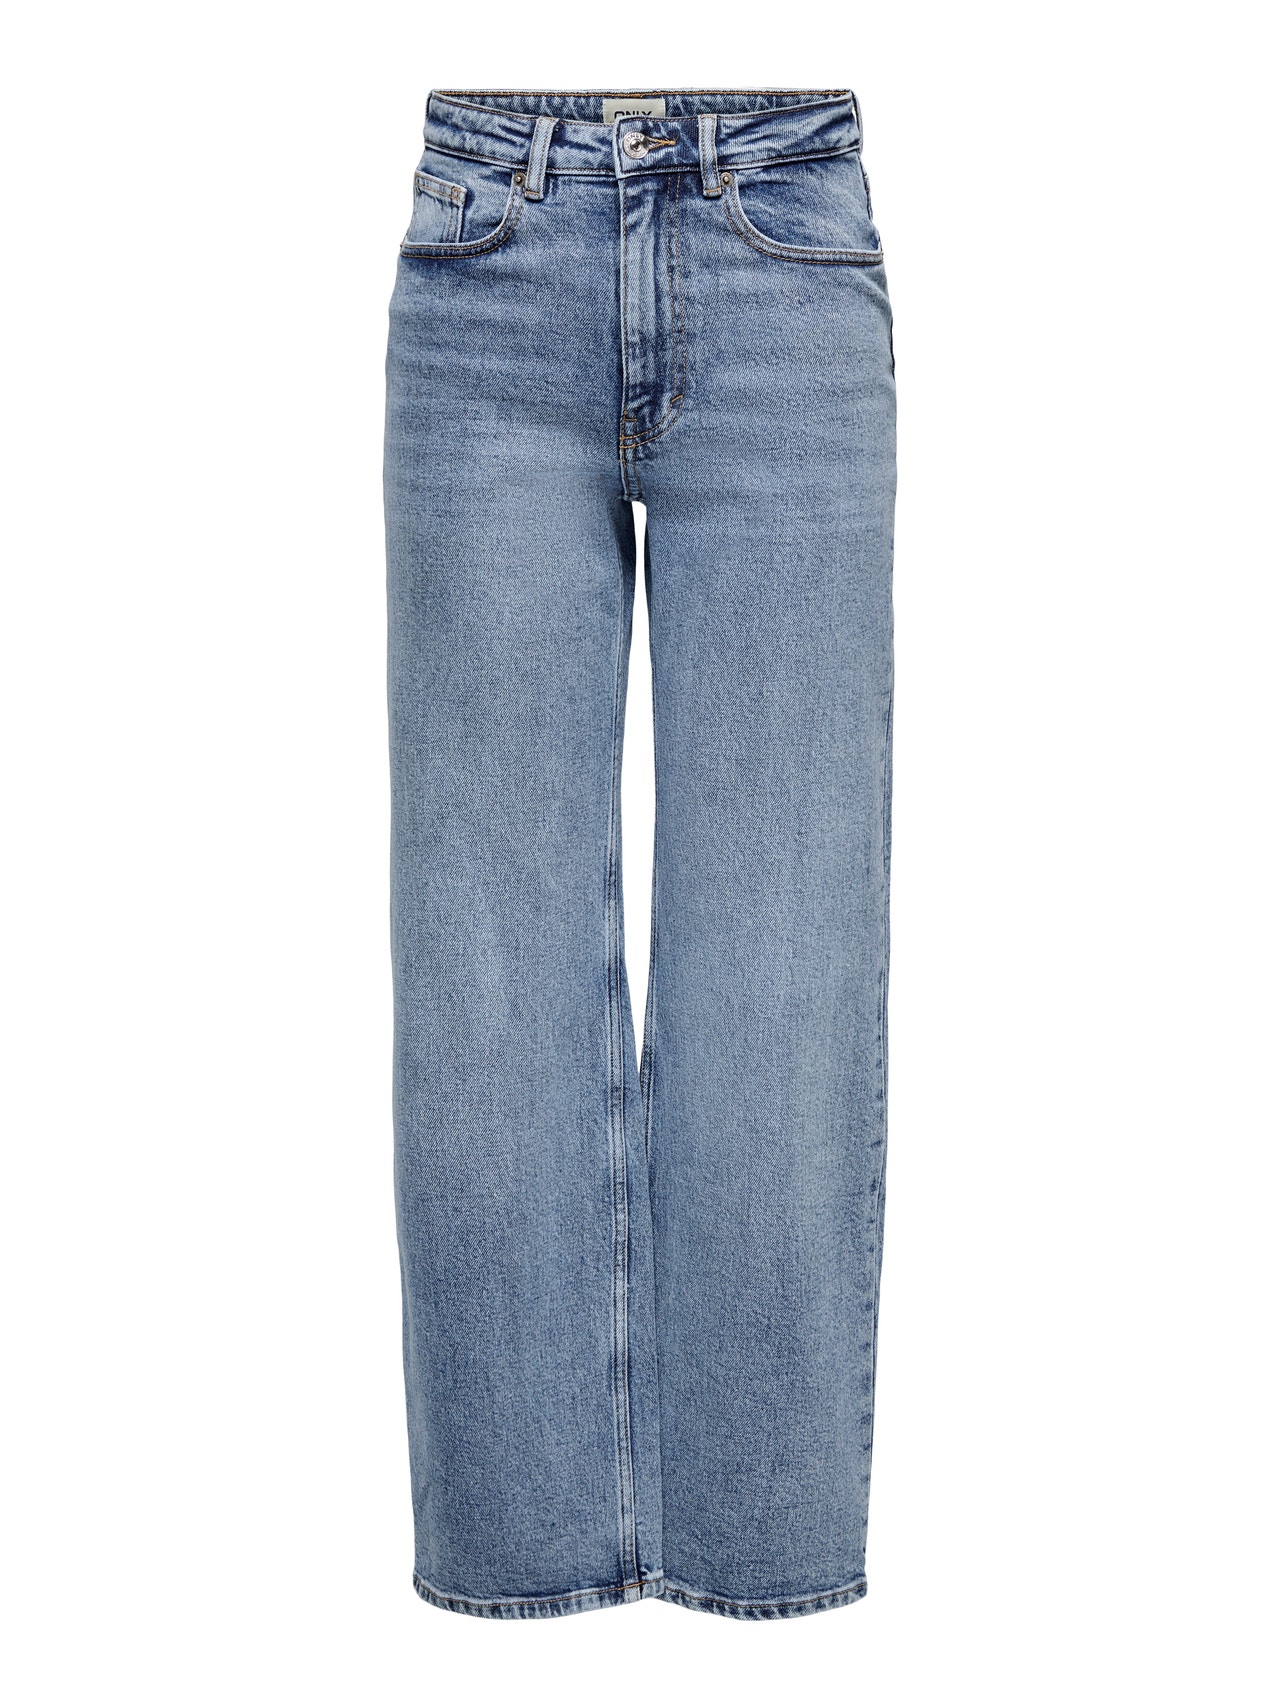 ONLJuicy life wide high waisted jeans, Medium Blue